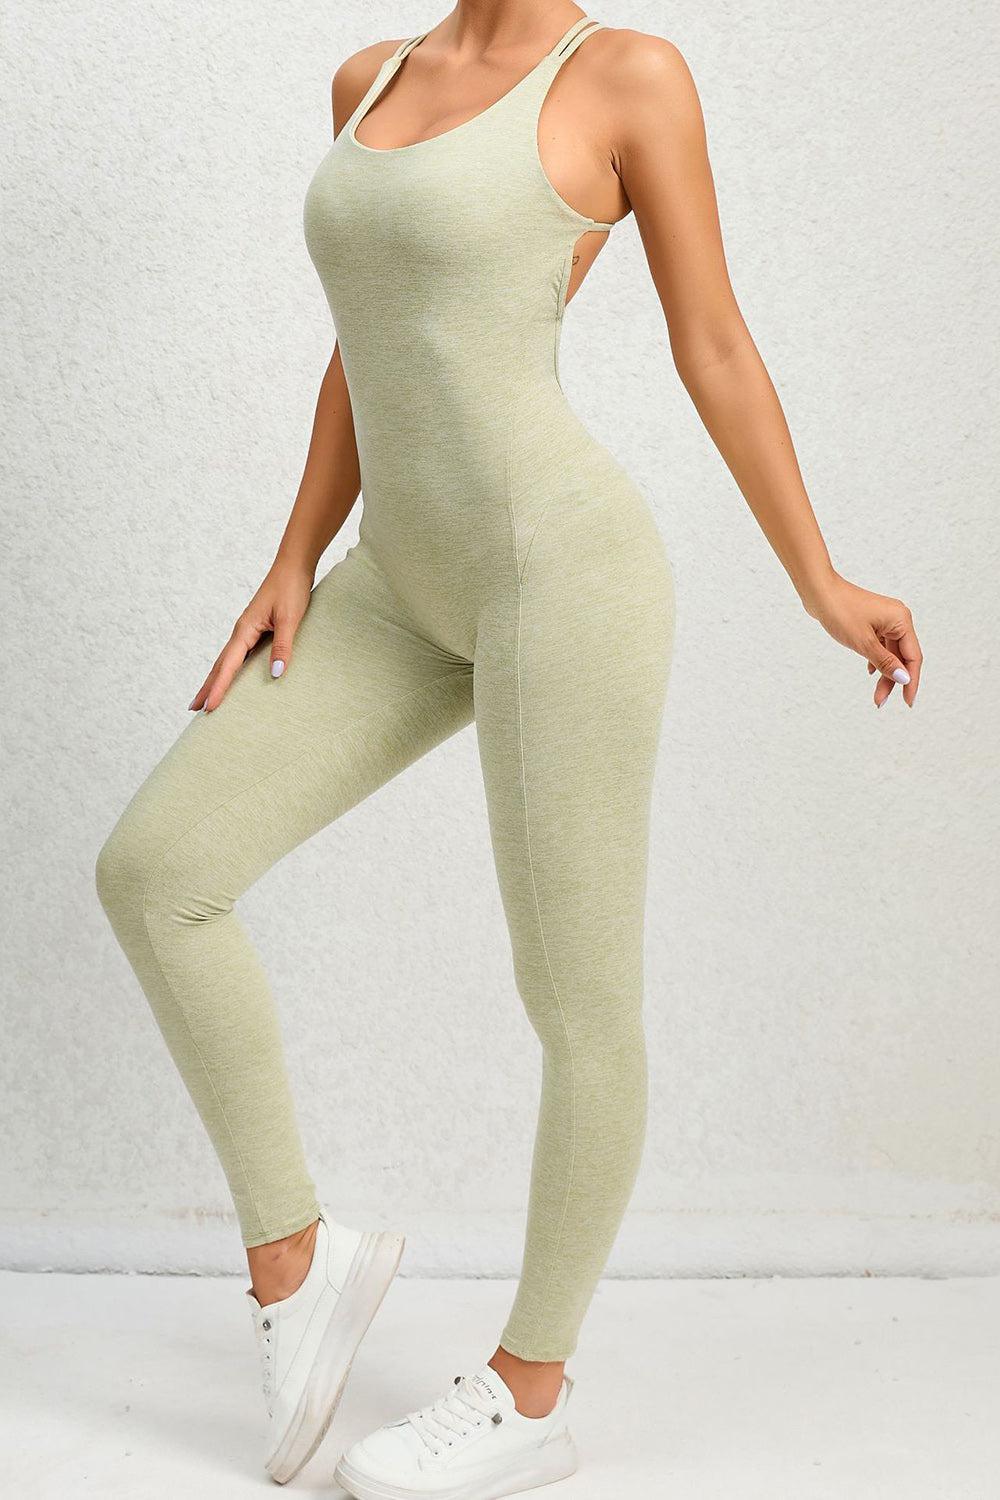 a woman in a light green bodysuit posing for a picture